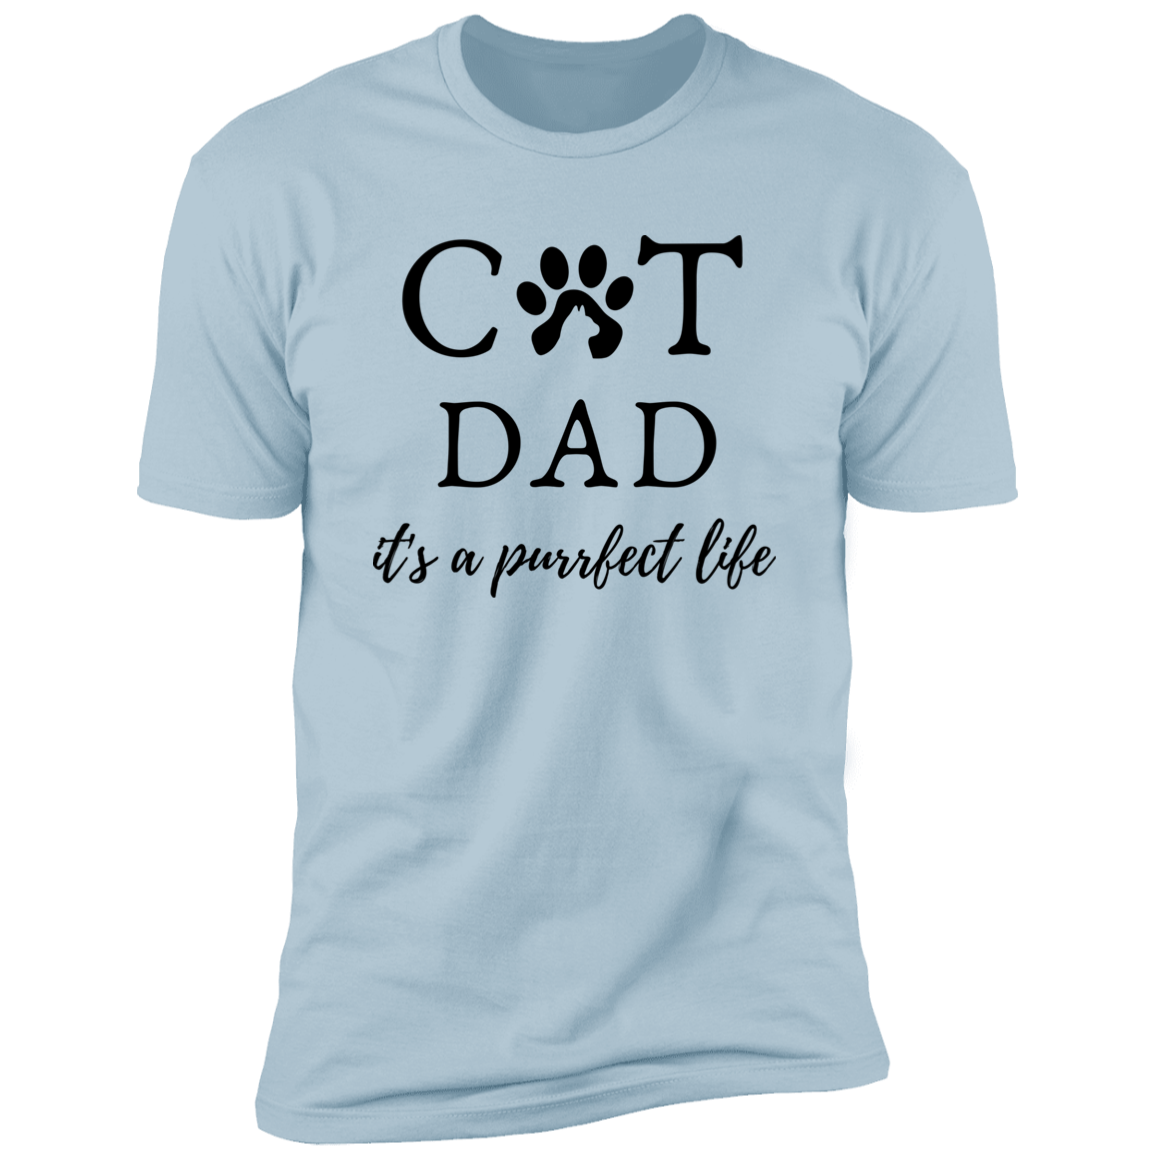 Cat Dad It's a Purrfect Life T-shirt, Cat Dad Shirt for humans, in light blue